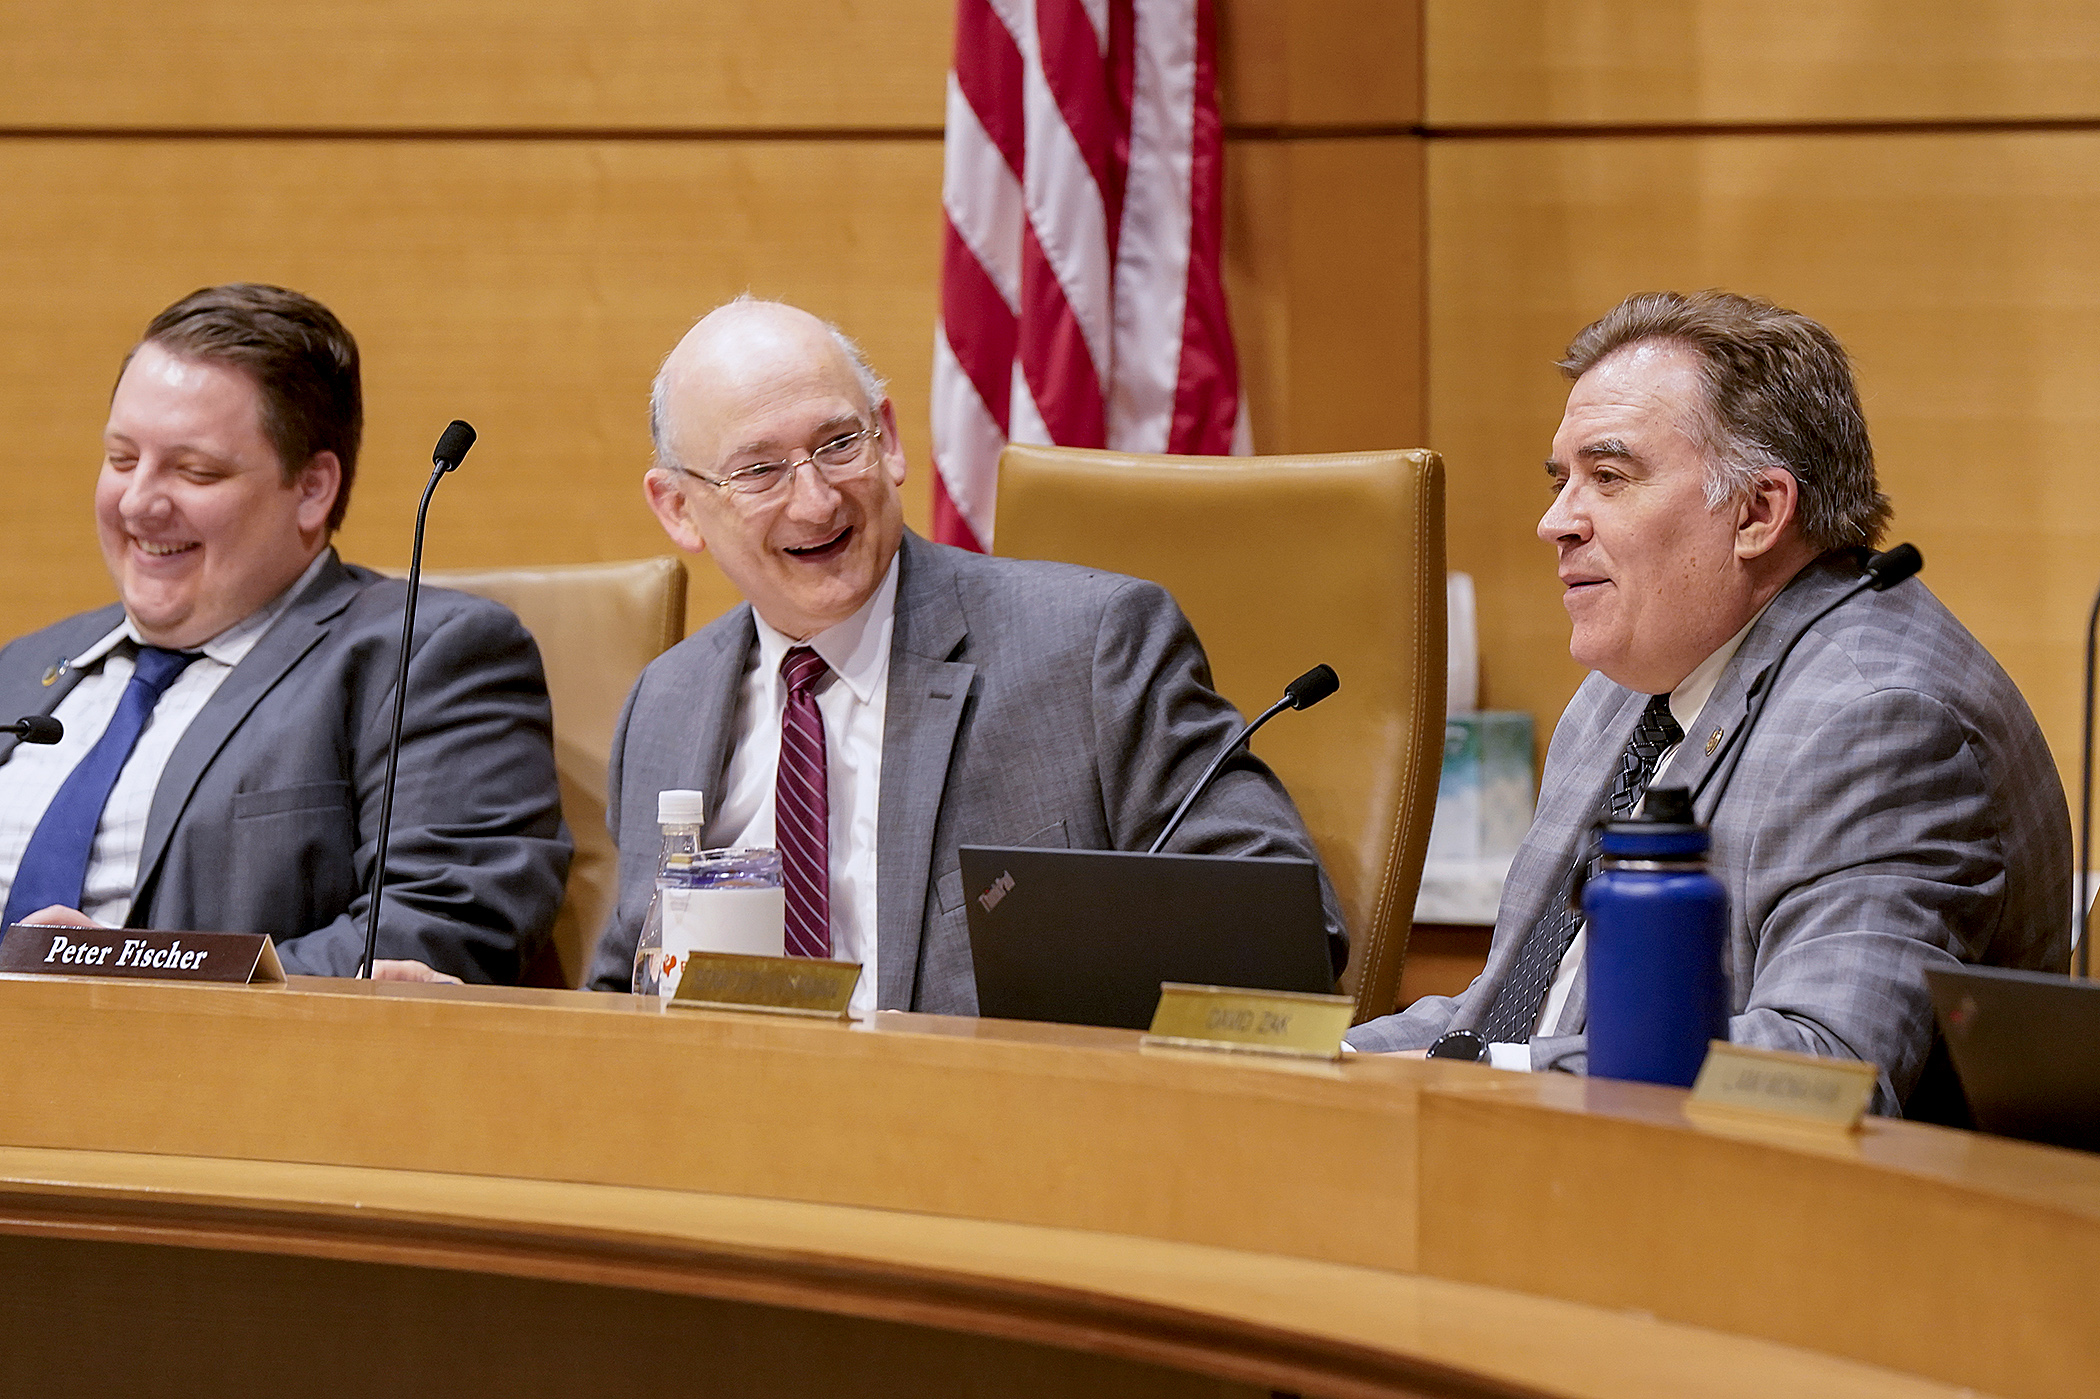 Rep. Peter Fischer, left, and Sen. John Hoffman share a light moment while hearing testimony May 2 during a meeting of the human services conference committee. (Photo by Michele Jokinen)